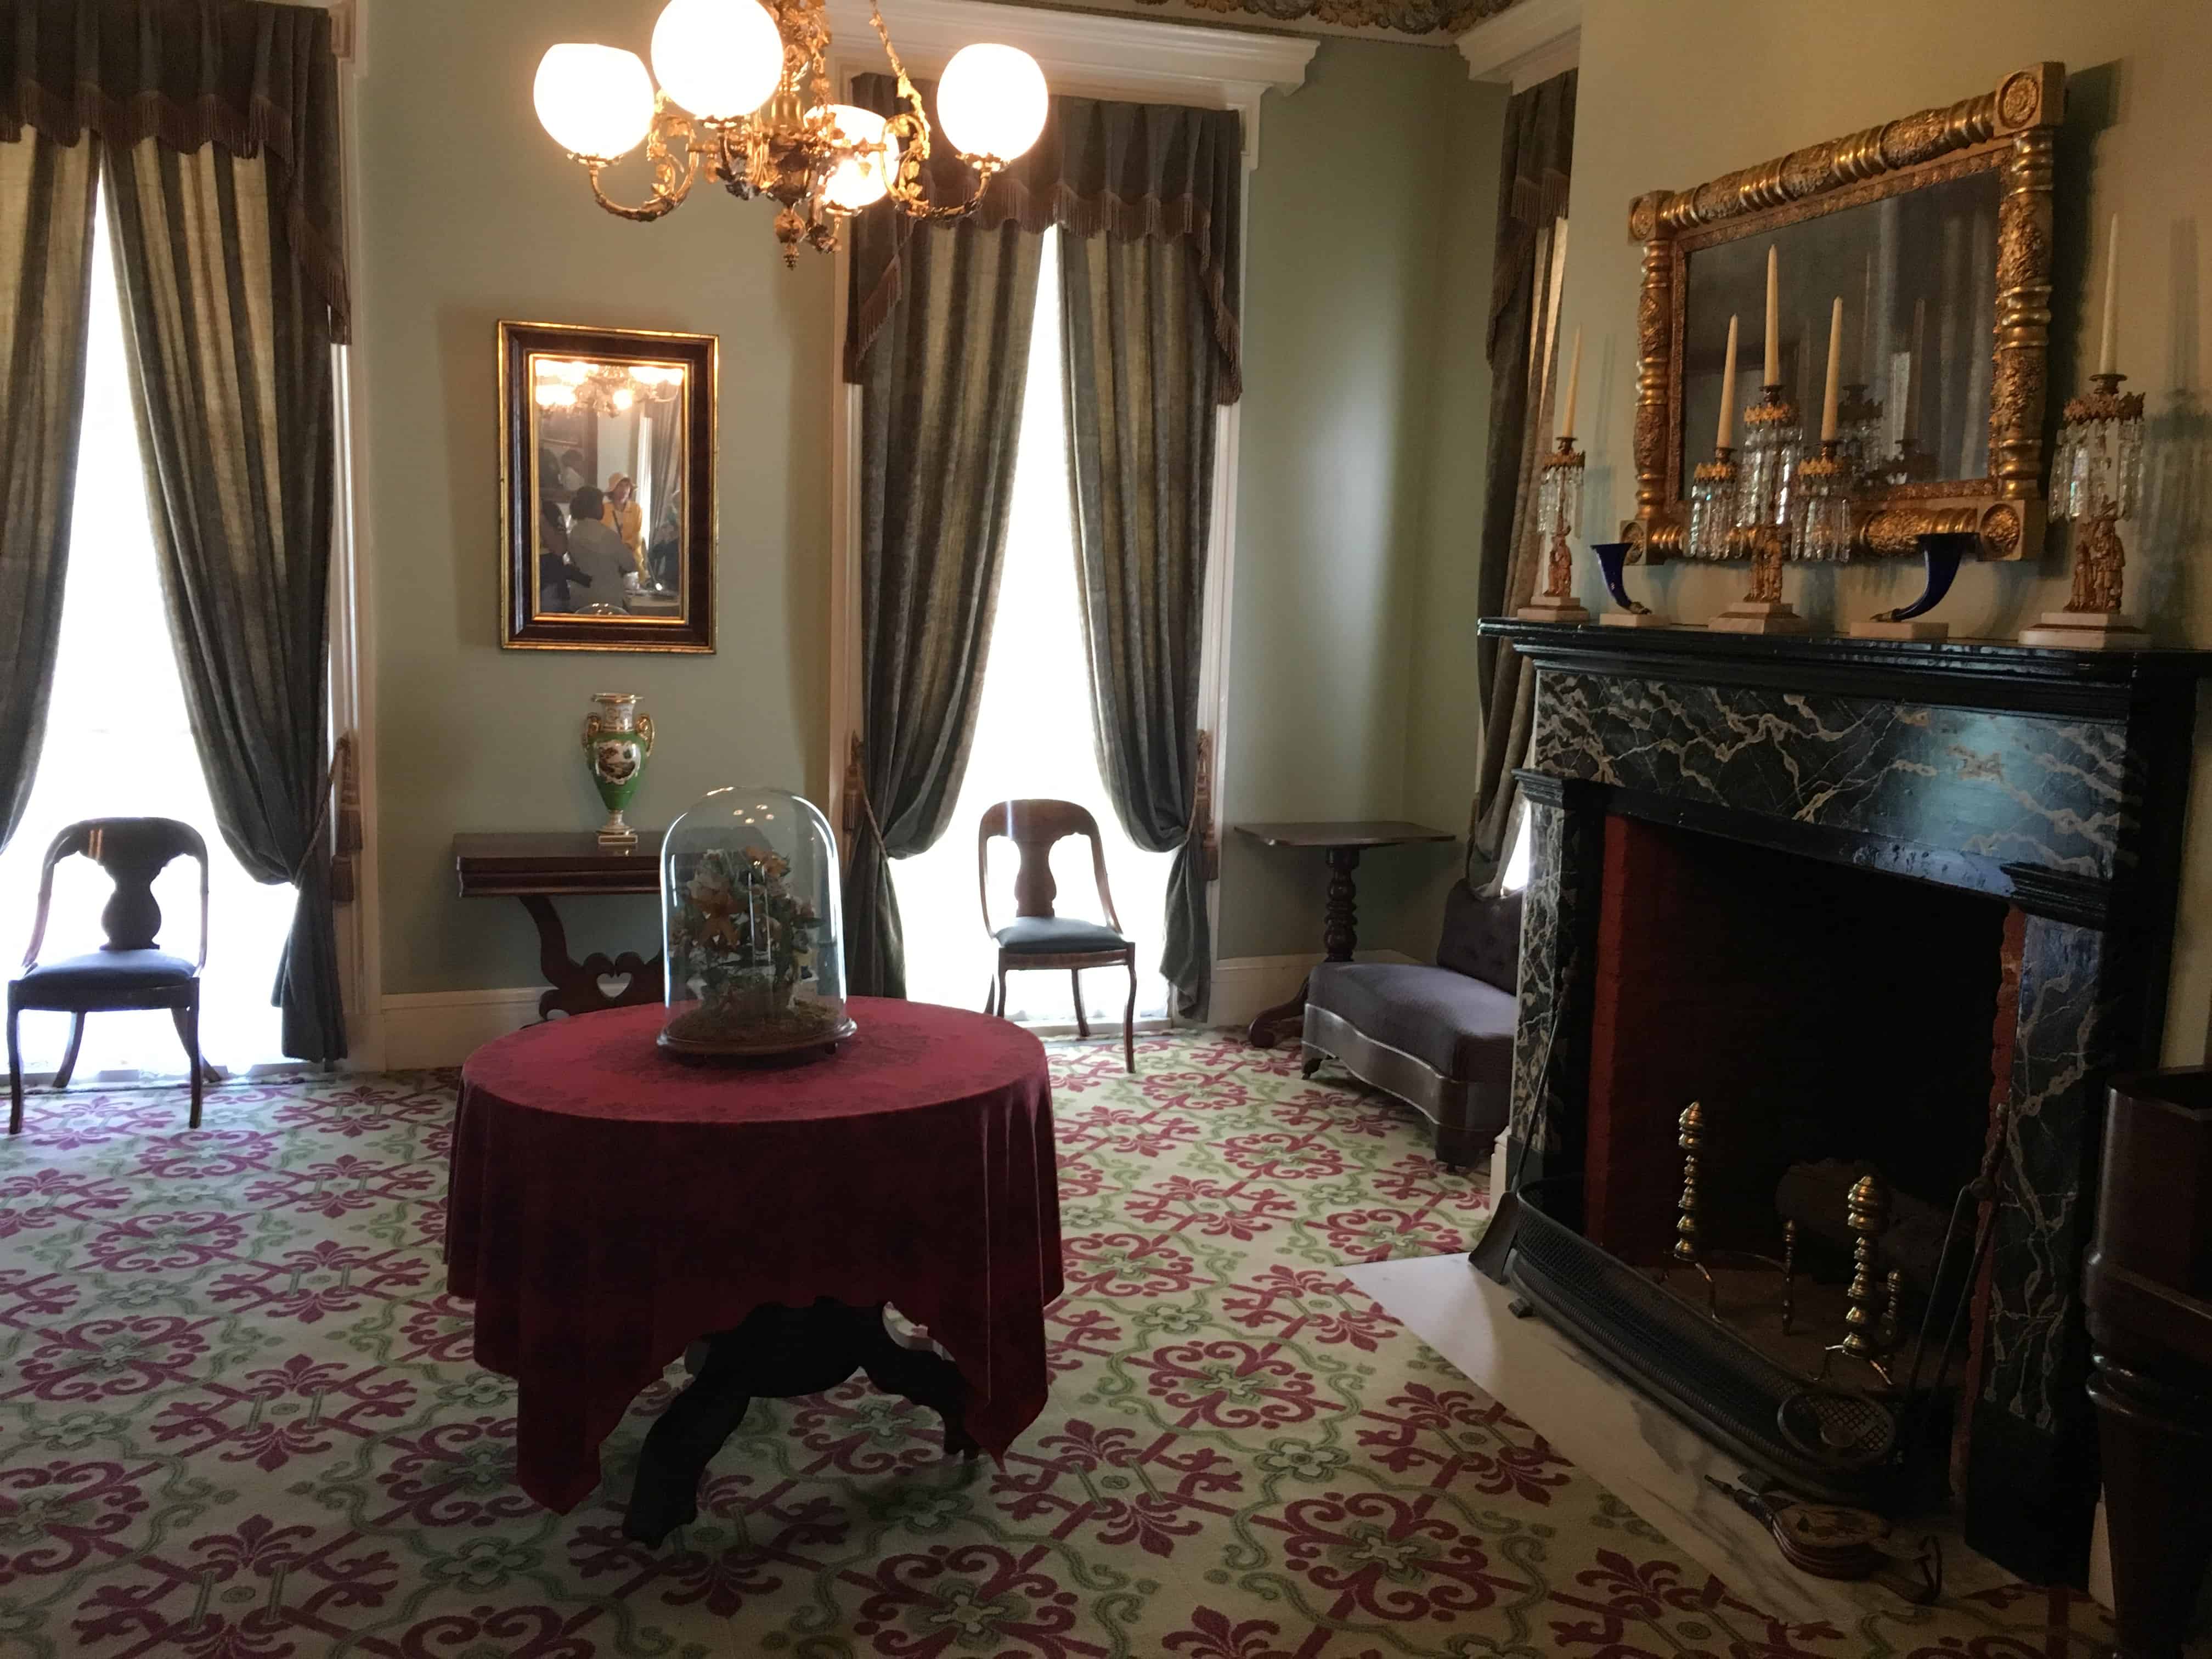 Parlor at the Henry B. Clarke House in Chicago, Illinois